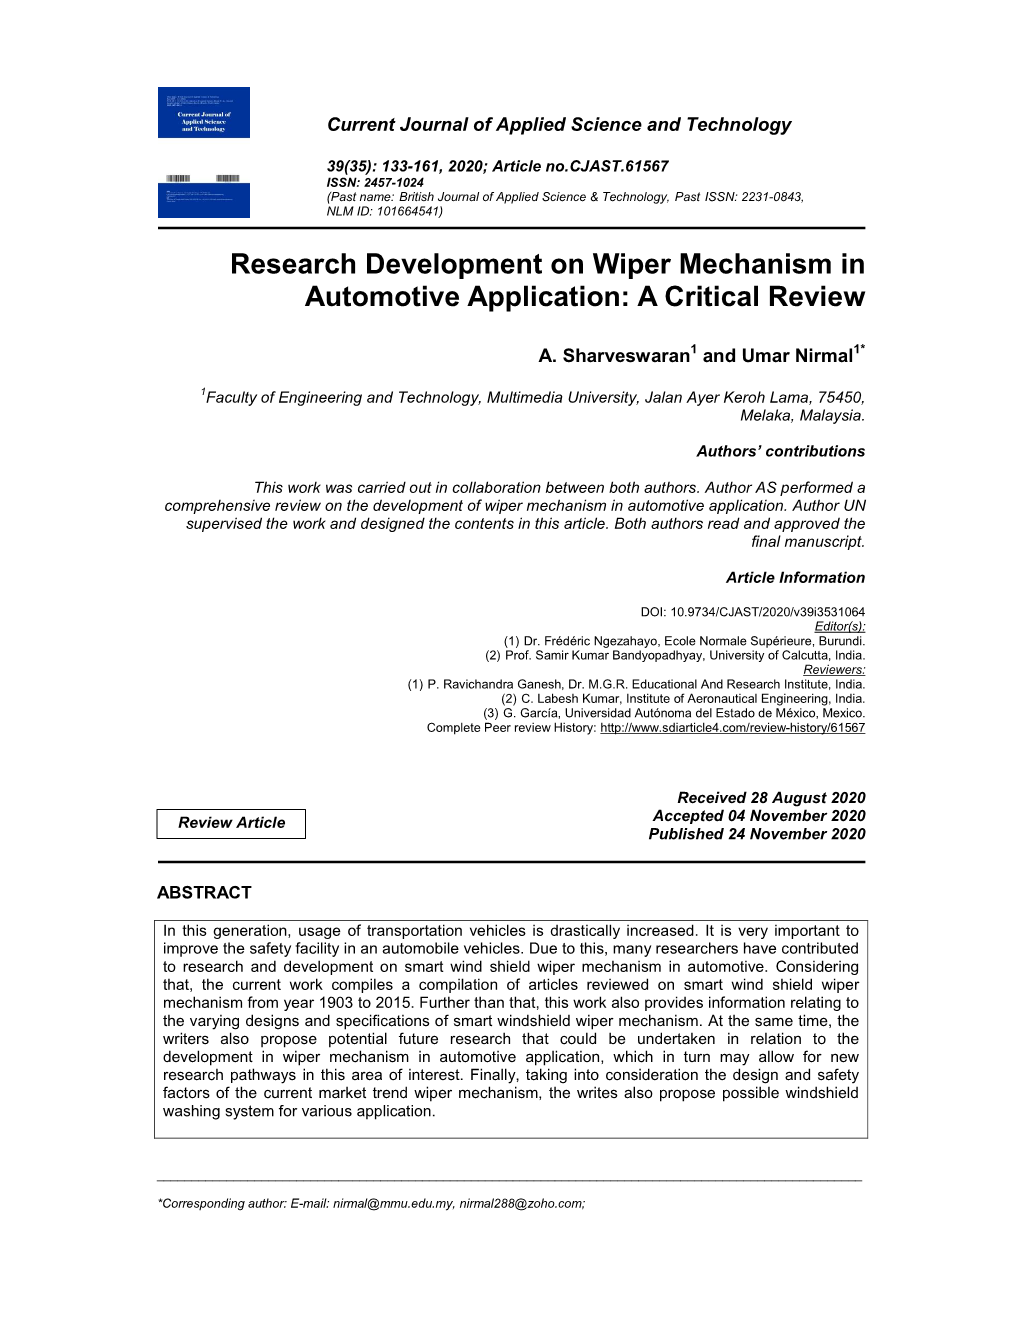 Research Development on Wiper Mechanism in Automotive Application: a Critical Review